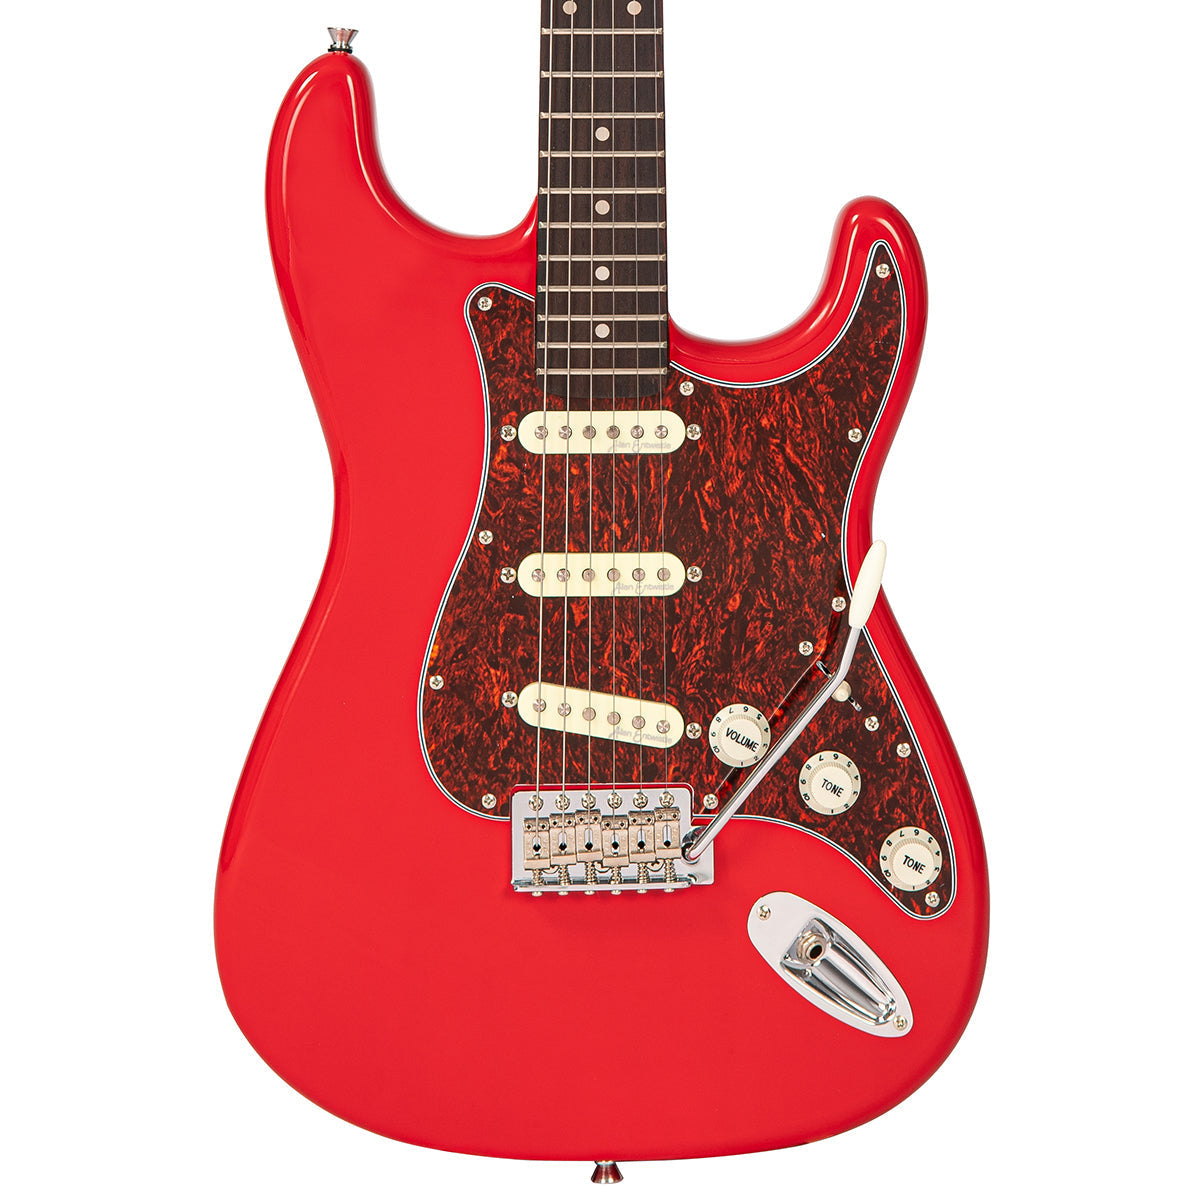 Vintage V60 Coaster Series Electric Guitar Pack ~ Gloss Red, Electric Guitar for sale at Richards Guitars.